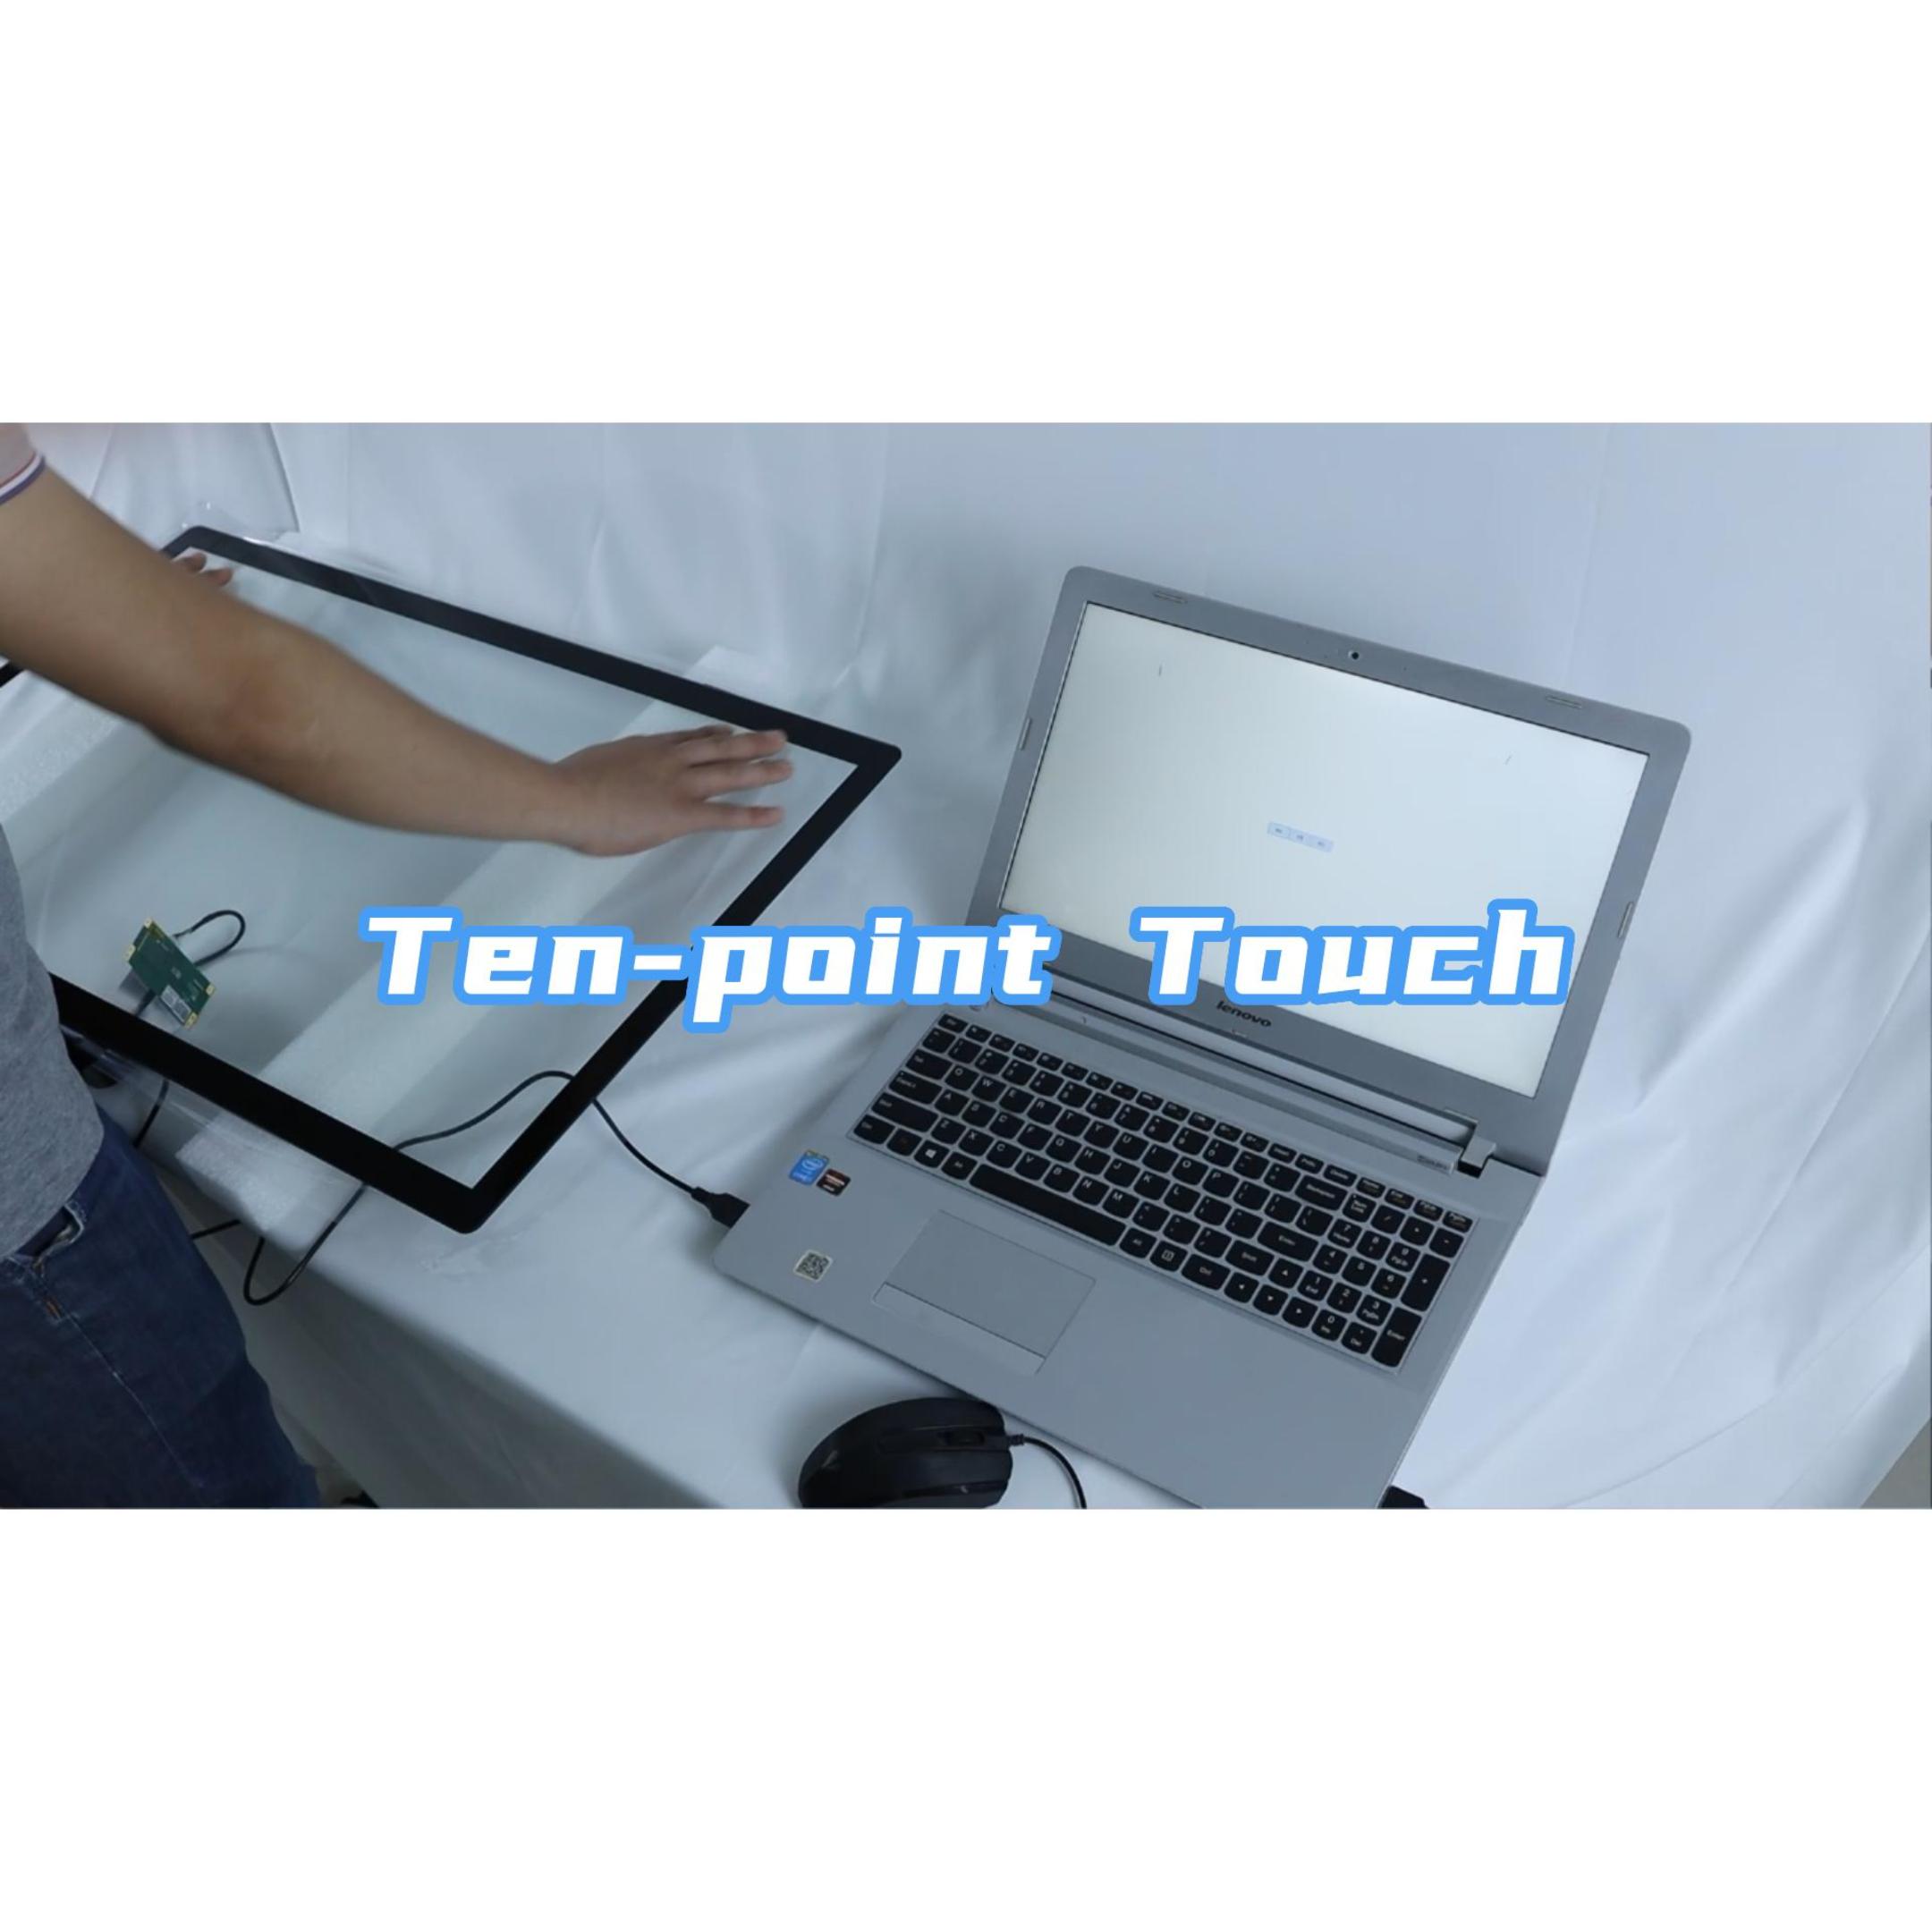 49 Inch Capacitive Multi Touch Panel For Kiosk Digital Display Screens